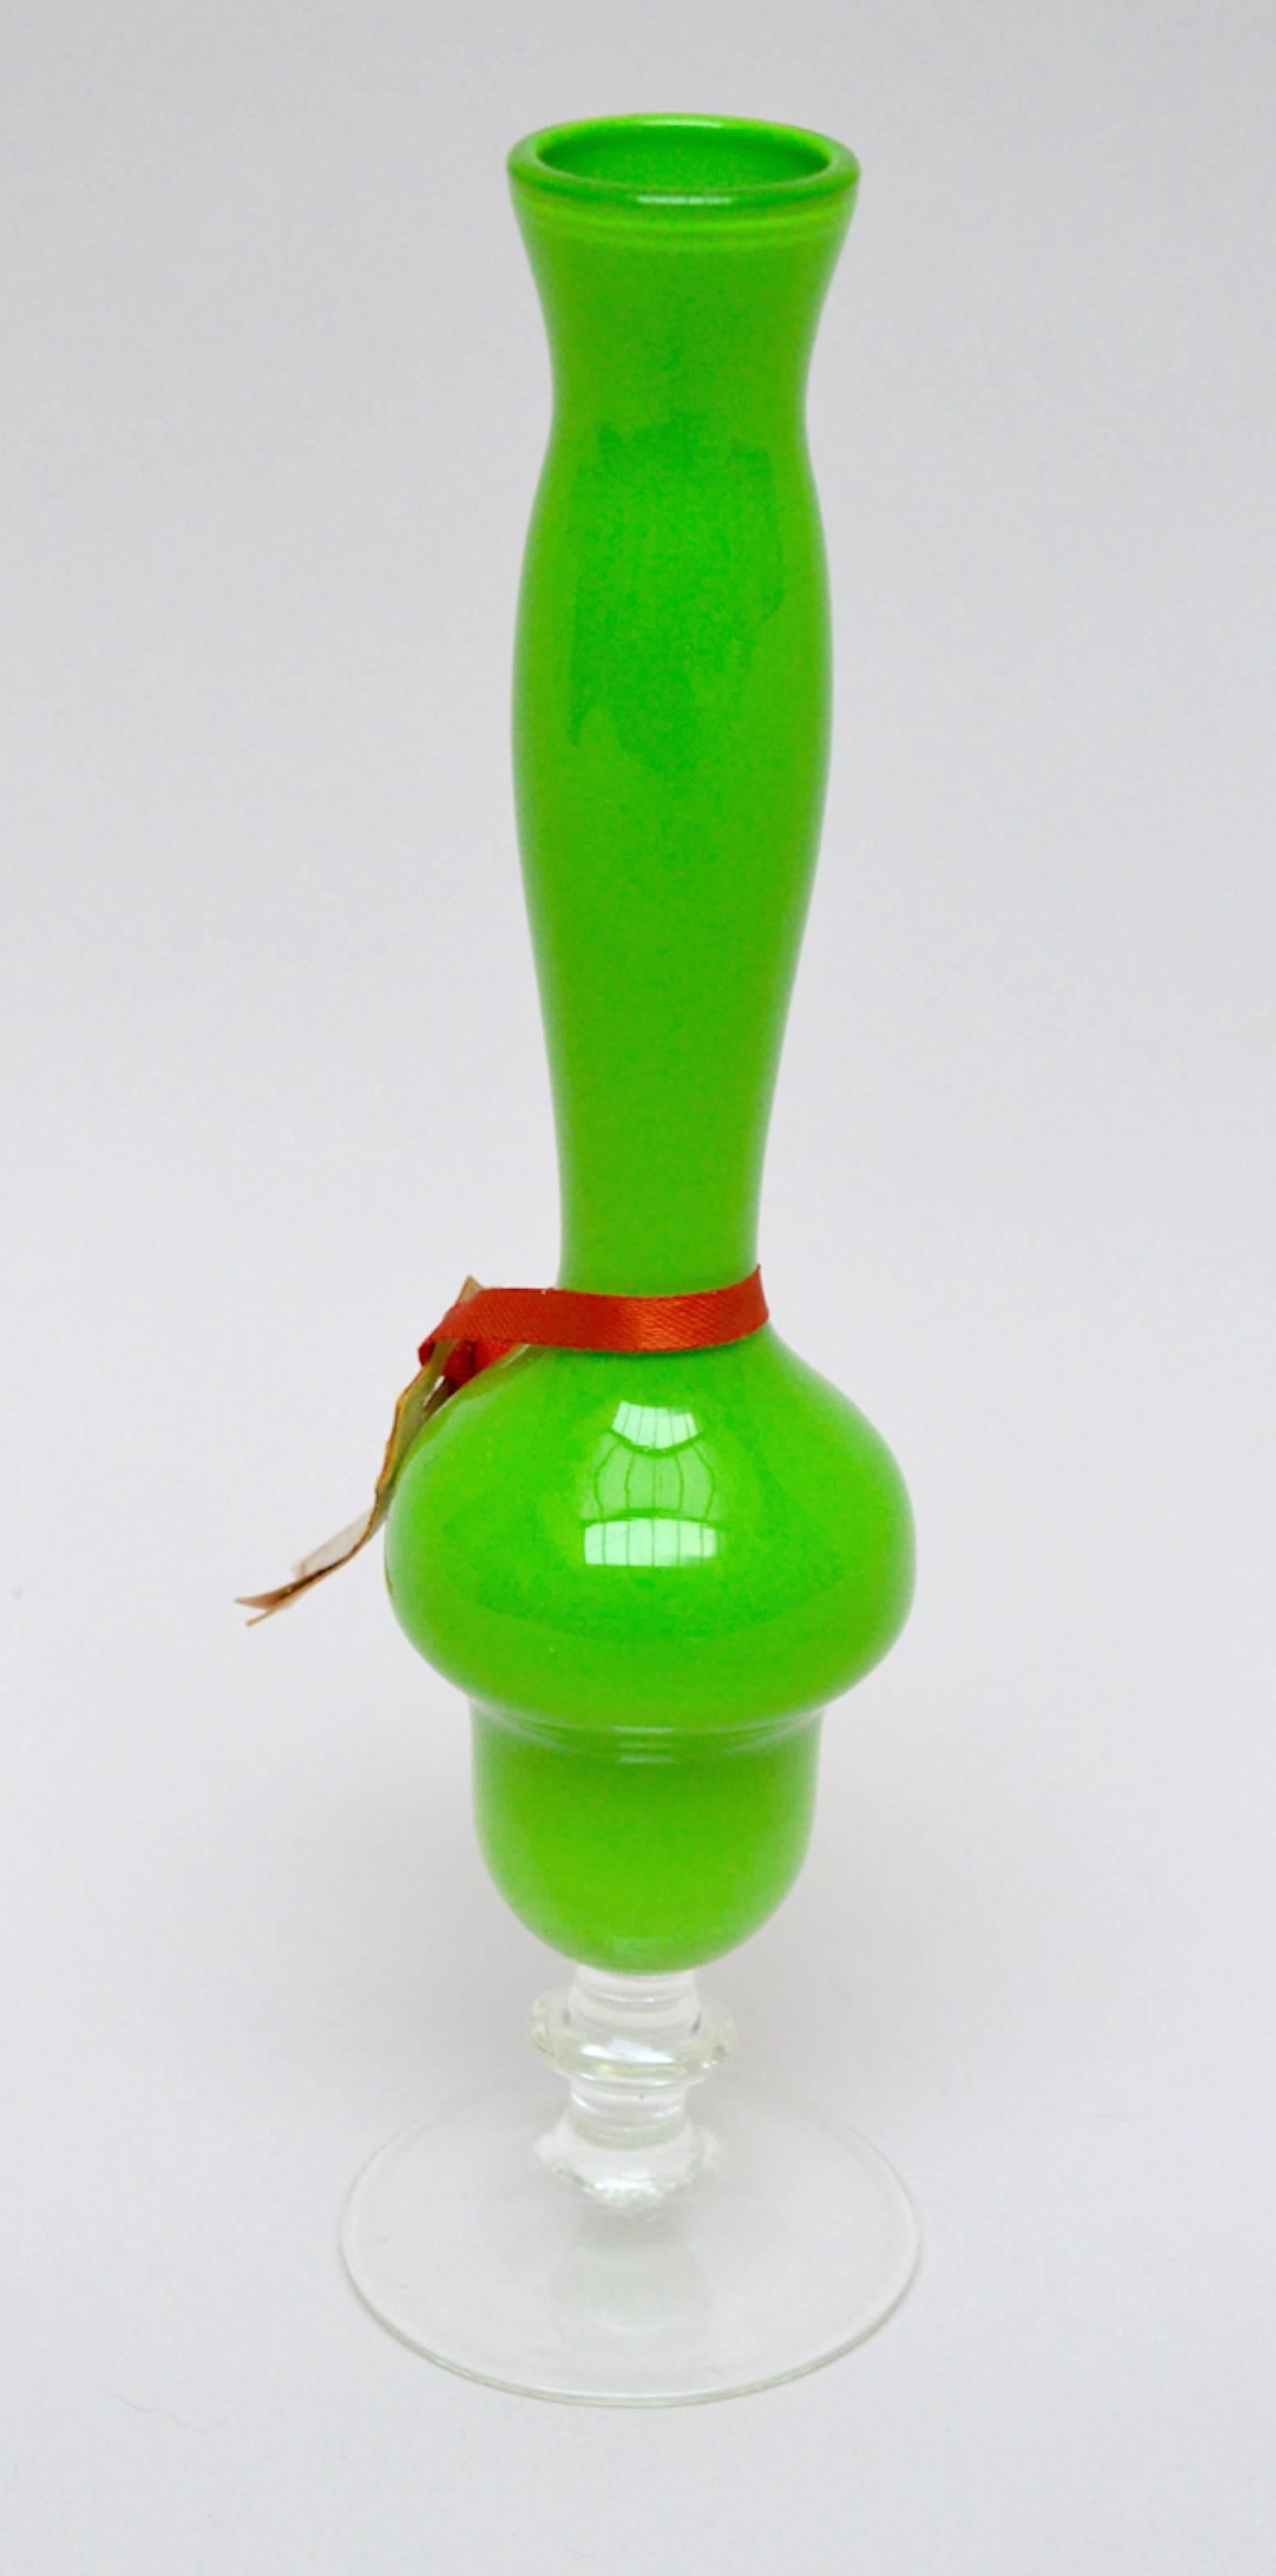 Fantastic 1960s apple green Italian opaline glass vase retaining the original label.
In excellent condition and just waiting for one perfect stem; an orchid, a rose or a spiky red dahlia??
What a perfect gift!